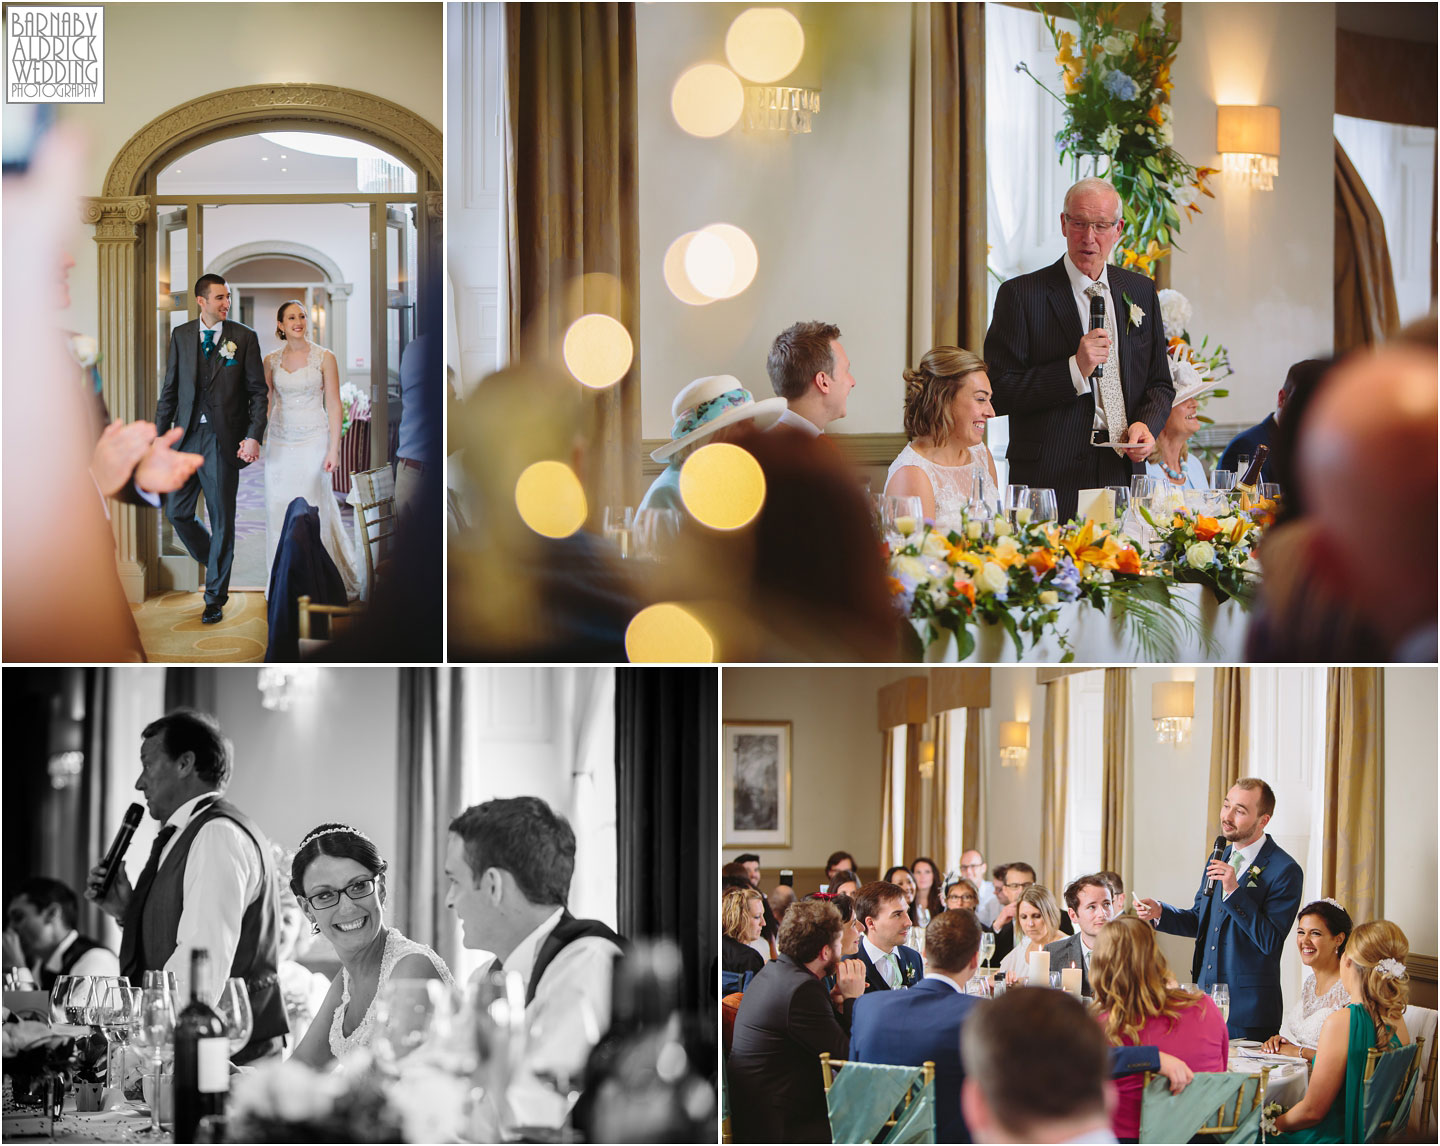 Reception Wedding Photos at The Mansion in Roundhay Park in Leeds Yorkshire